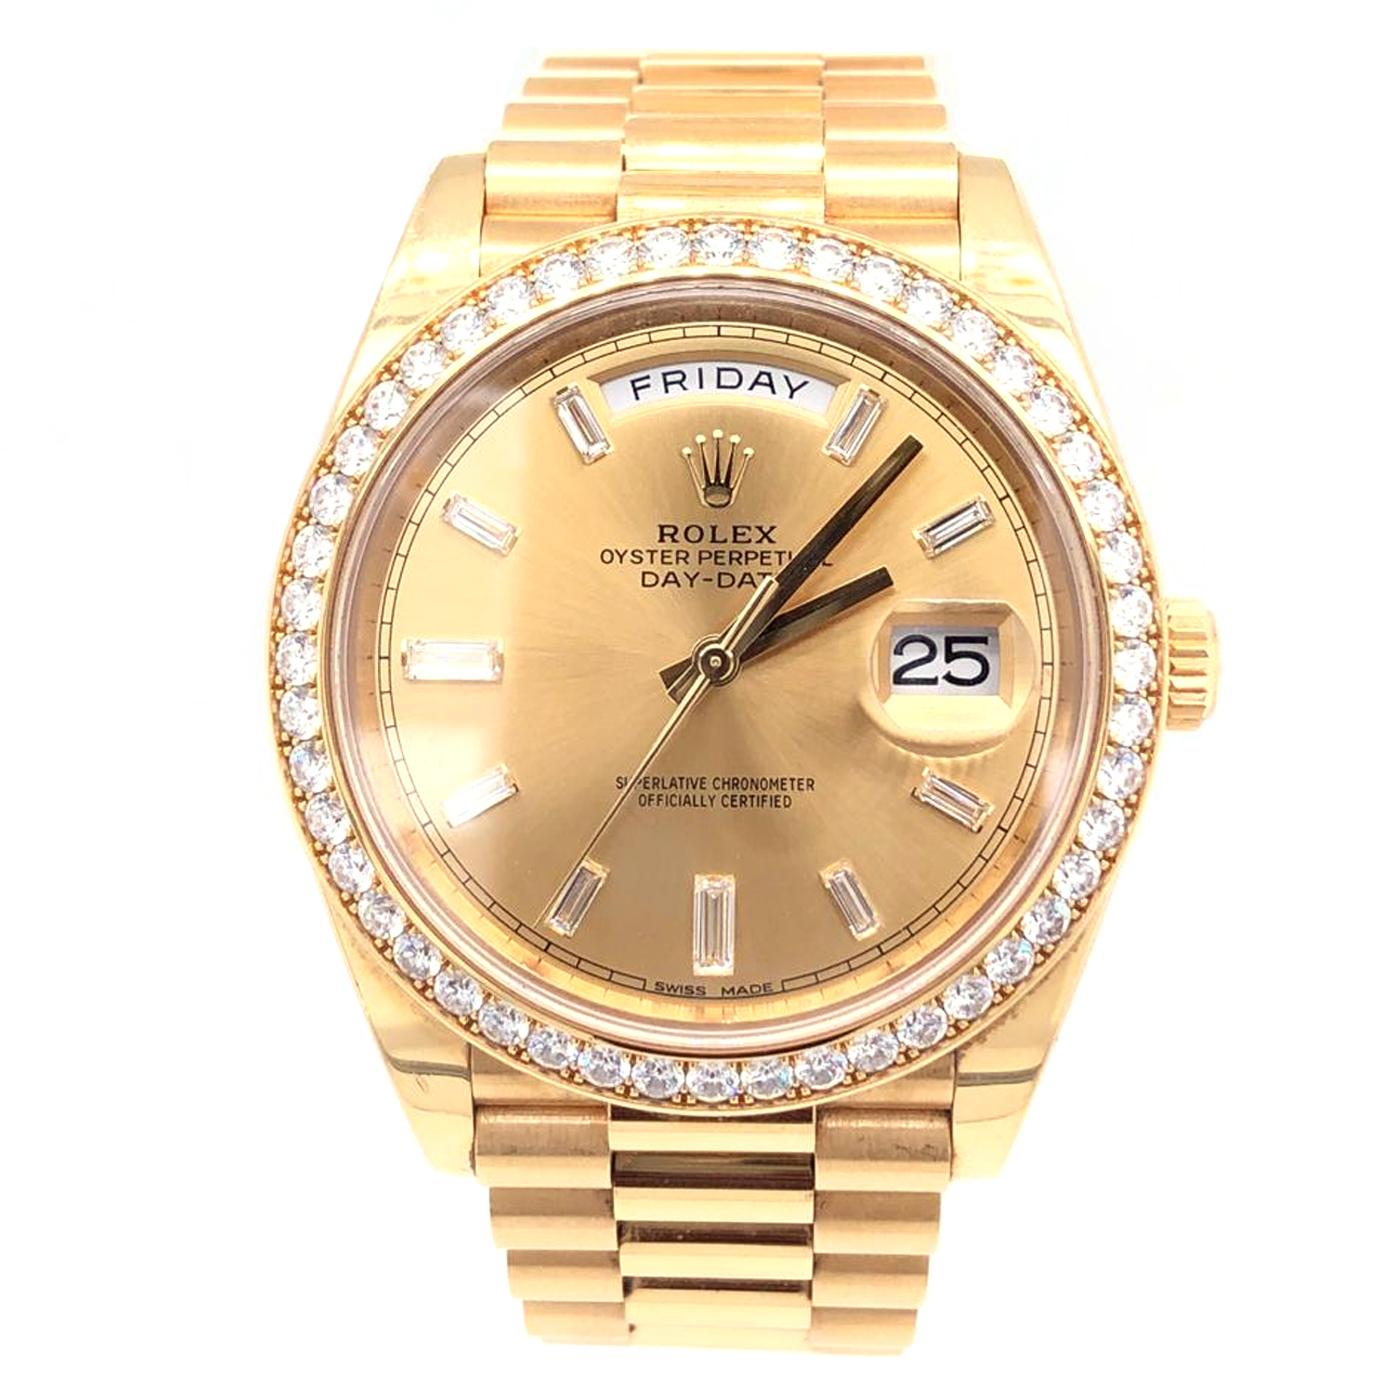 The Oyster Perpetual Day-Date 40 in 18 ct yellow gold, with a champagne color, diamond-set dial, diamond-set bezel, and a President bracelet.
Its dial features 10 baguette-cut diamonds. The Day-Date was the first watch to indicate the day of the